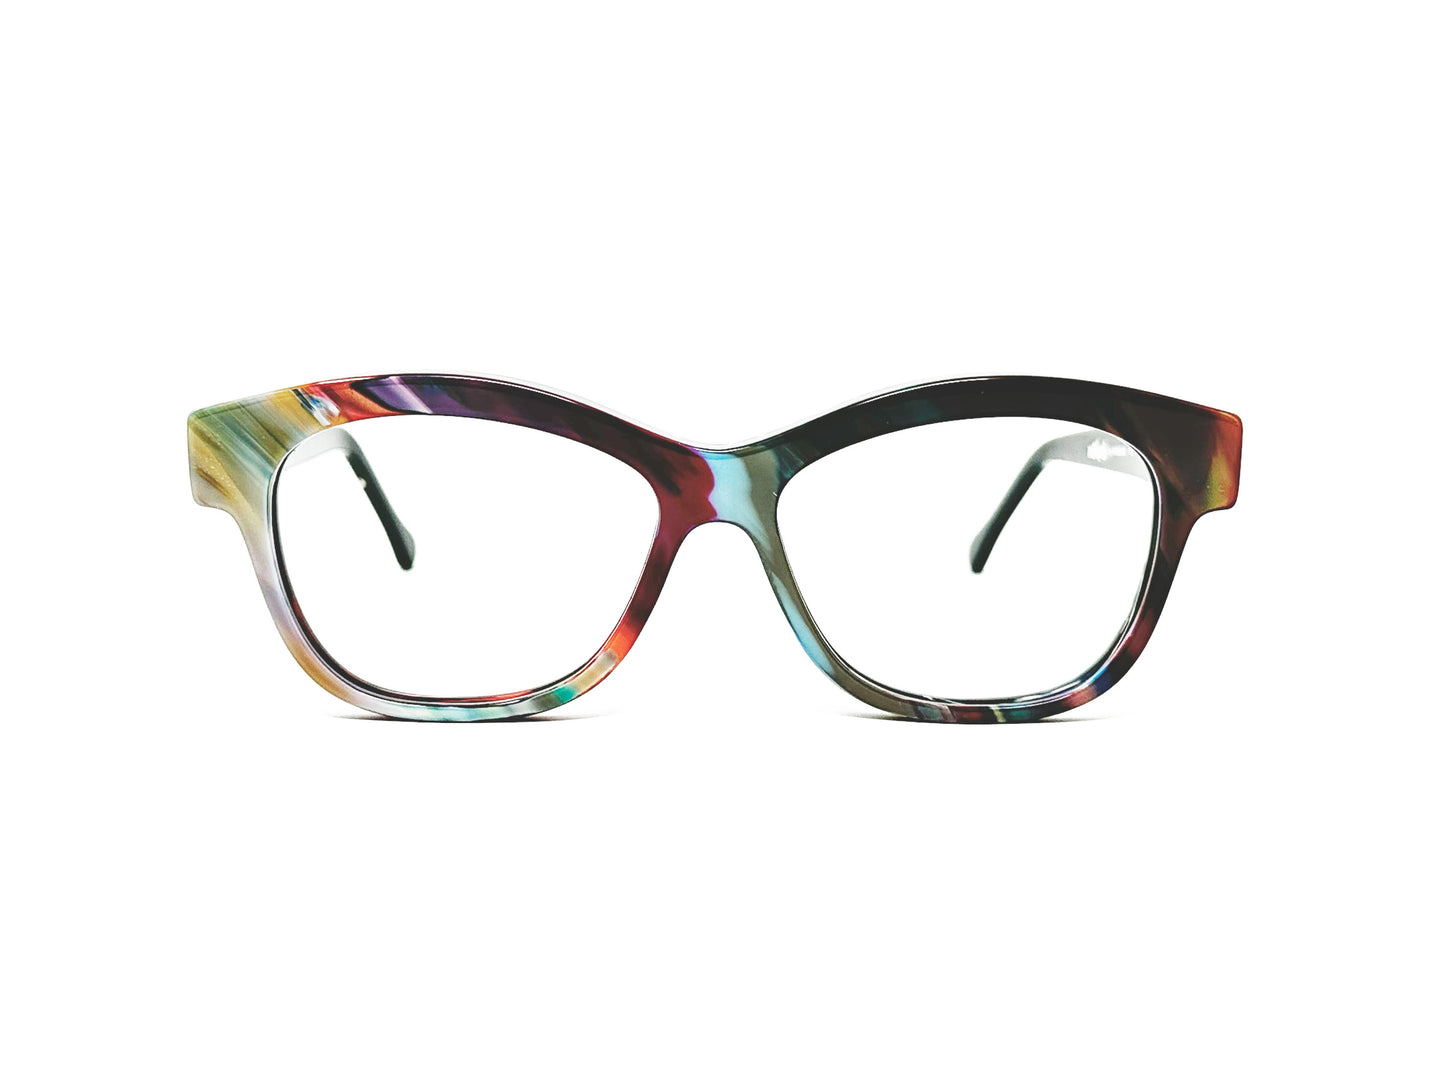 Viktlos recycled acetate optical frame. Square shaped with soft, lifted angles and v-curve on top of frame. Model: RC013. Color: 2638 - Cool toned multi-color. Front view.